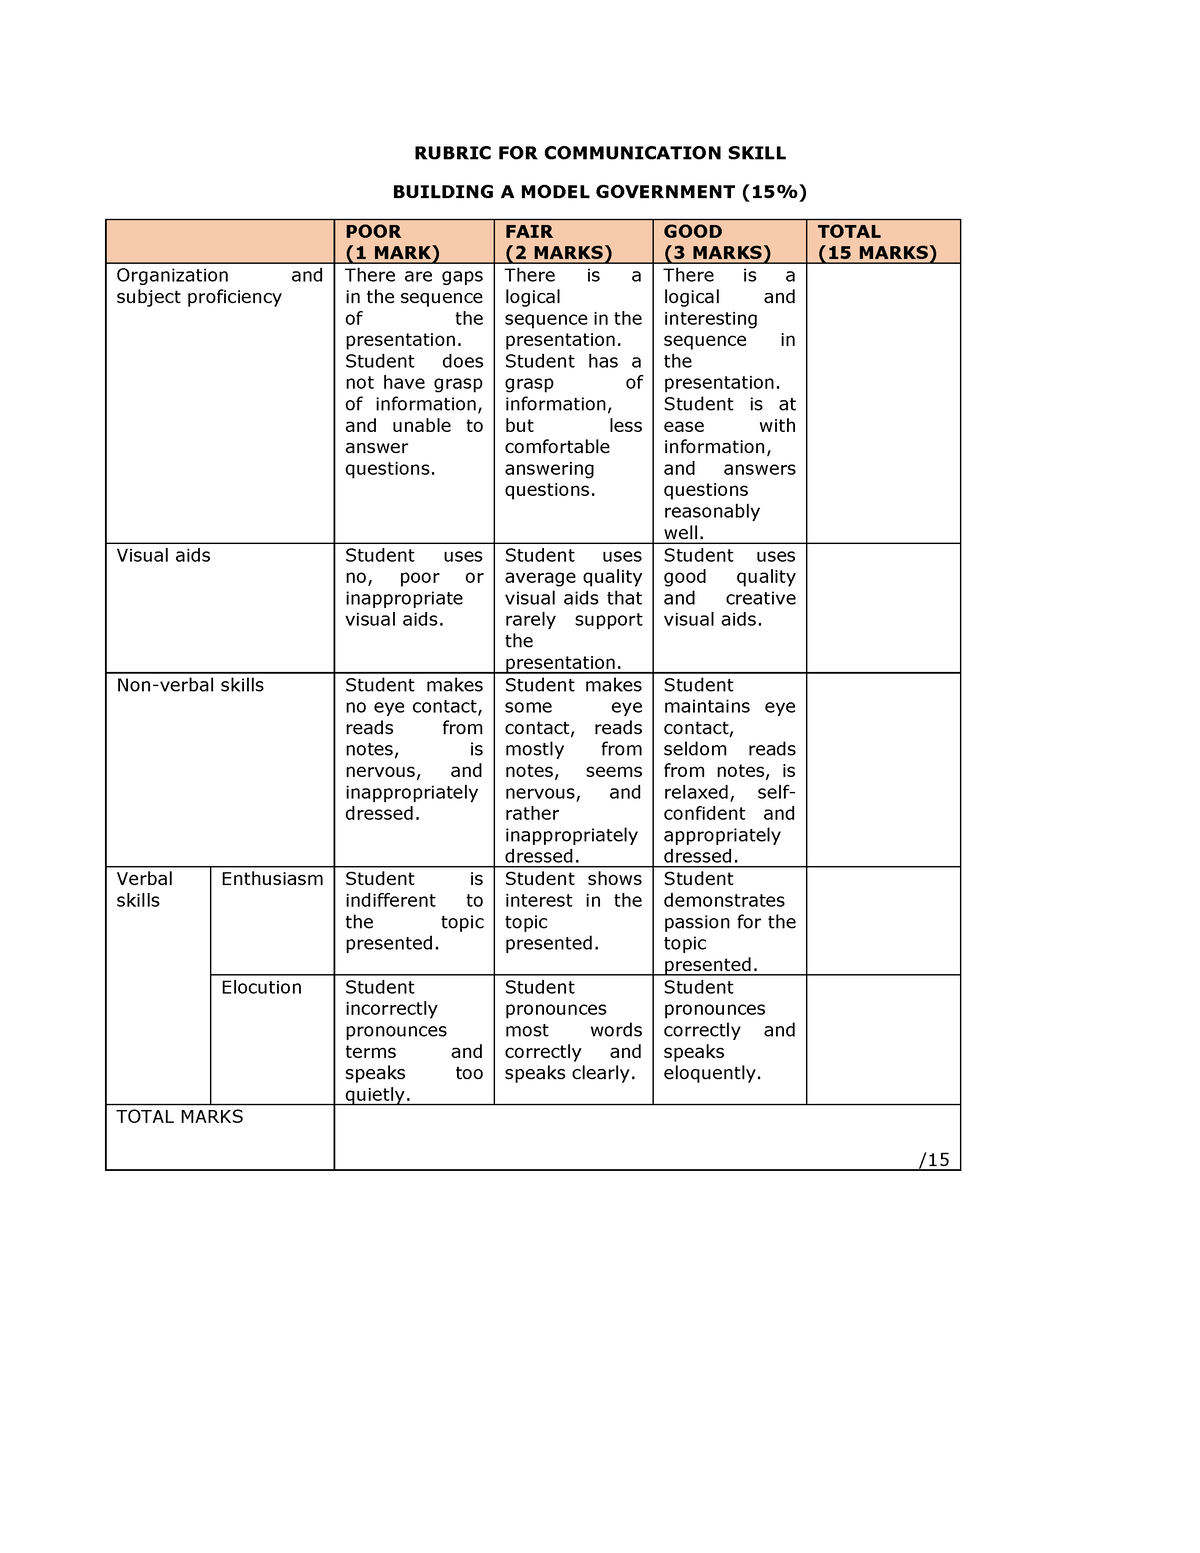 Rubric MG - RUBRIC FOR COMMUNICATION SKILL BUILDING A MODEL GOVERNMENT ...